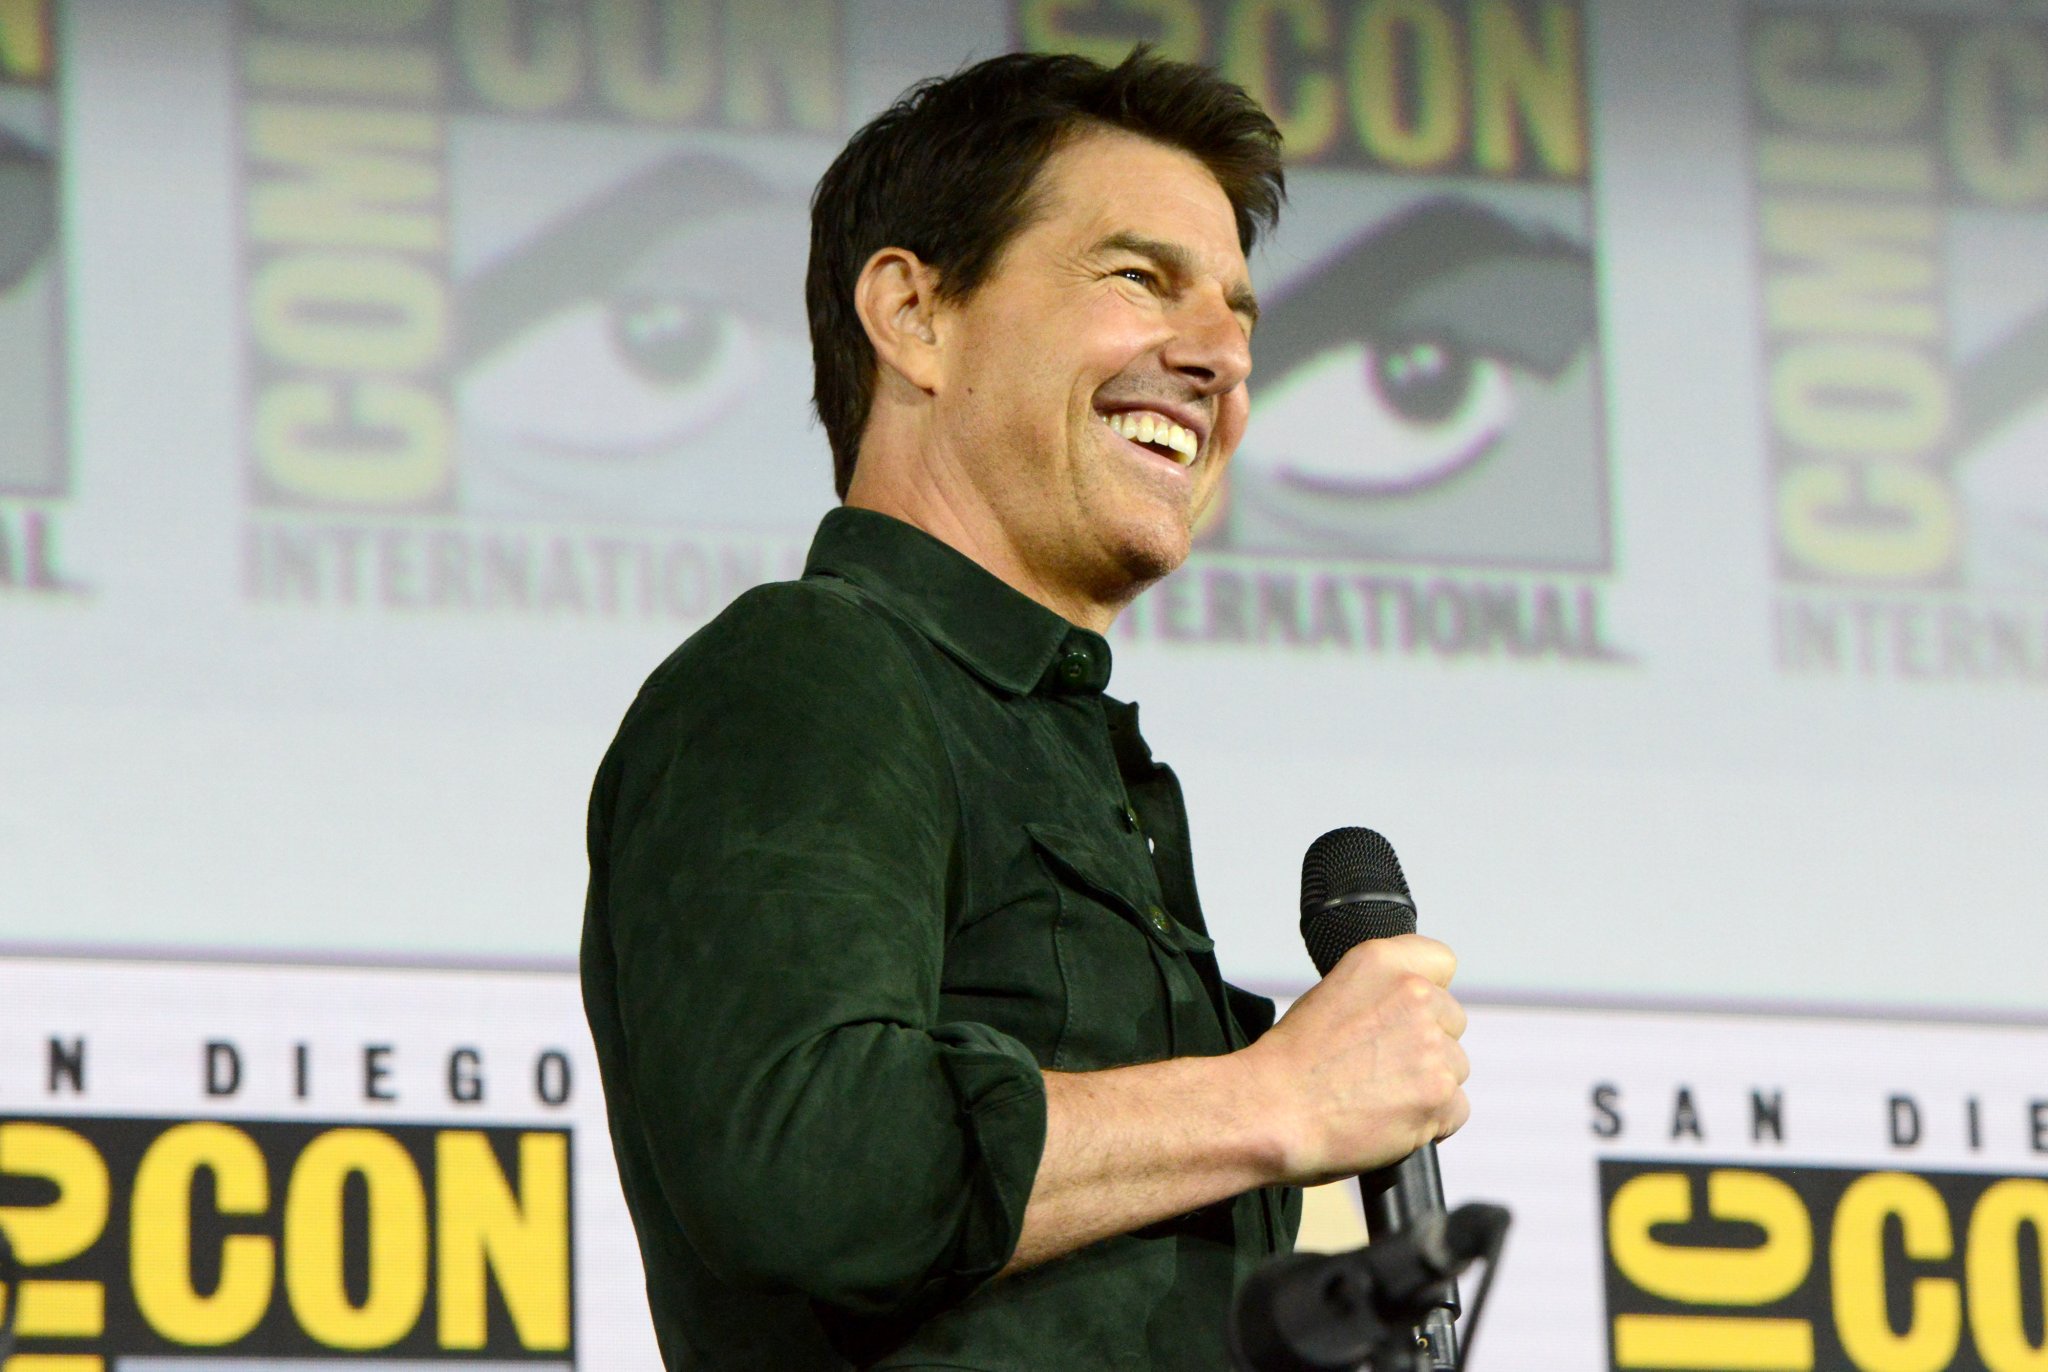 Tom Cruise Trying To Be Normal At The Movies Is Deeply Troubling